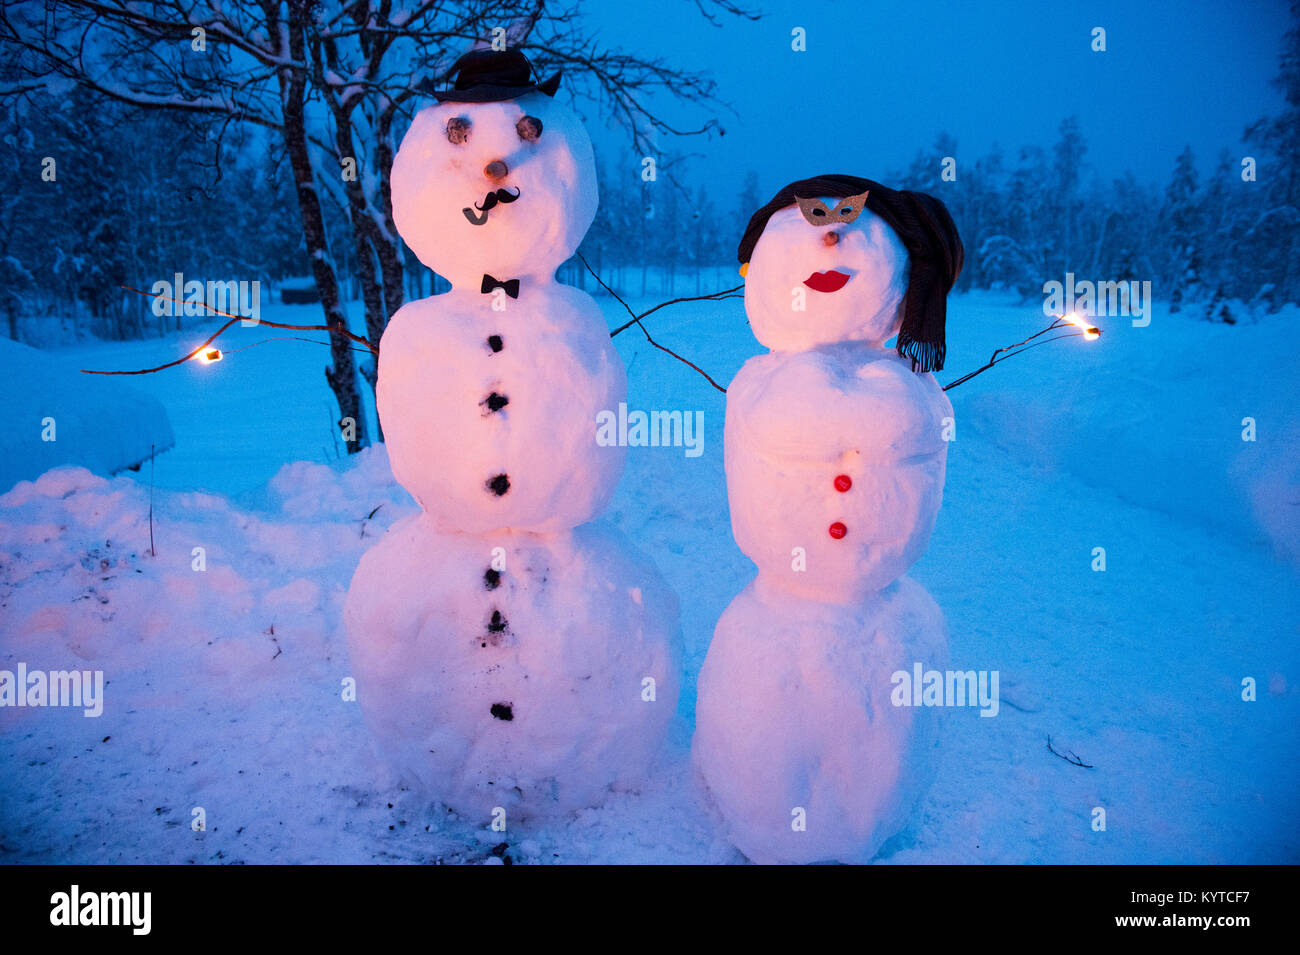 Male and female snowman holding sparklers. Stock Photo